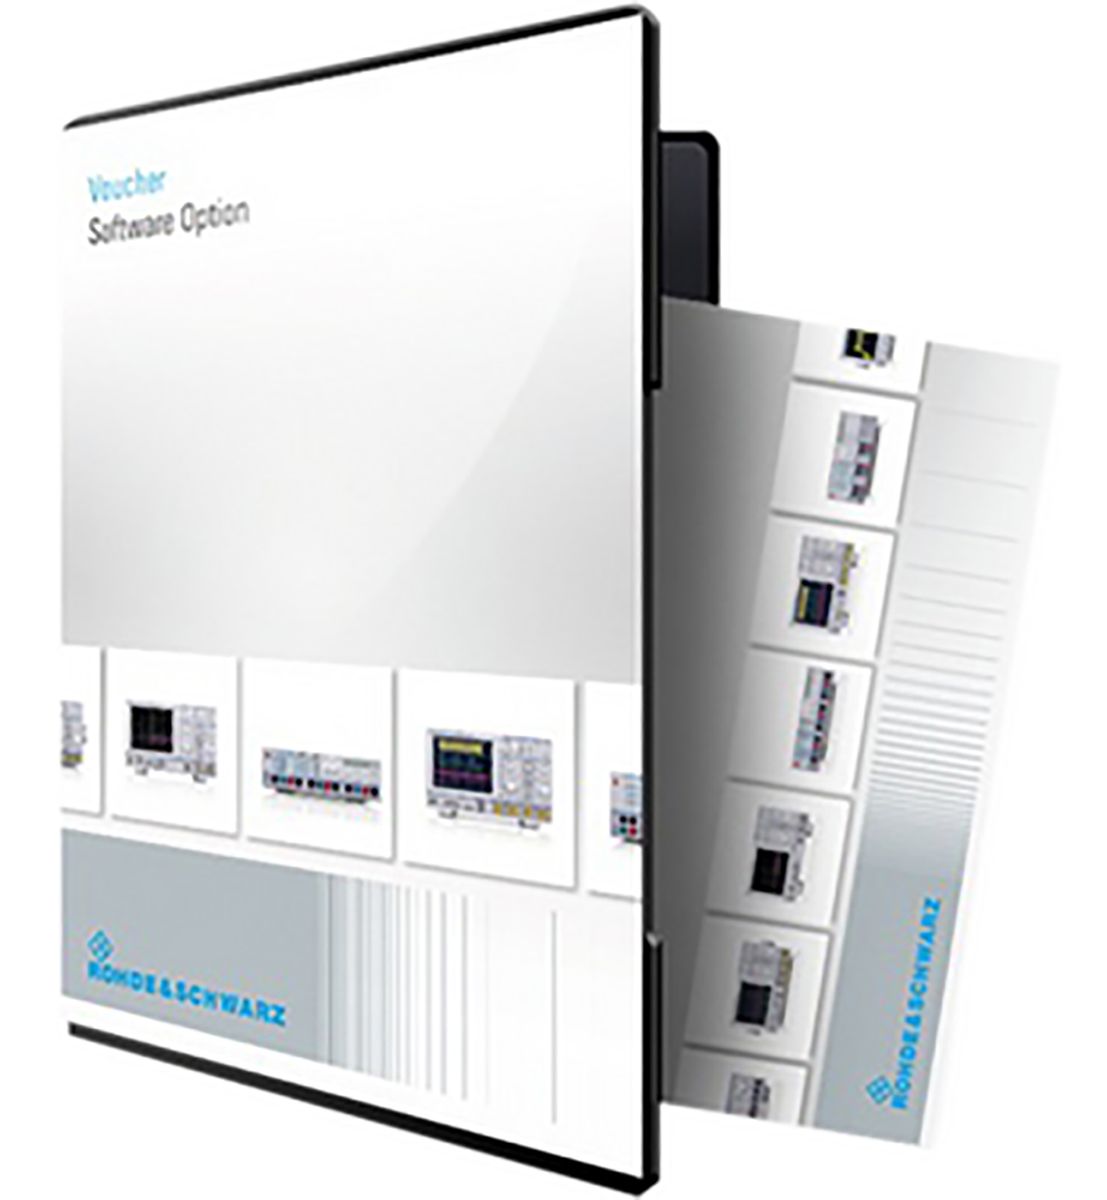 Rohde & Schwarz FPC-B200 Wi-Fi Connection Support, For Use With FPC1000 Spectrum Analyser With RS Calibration